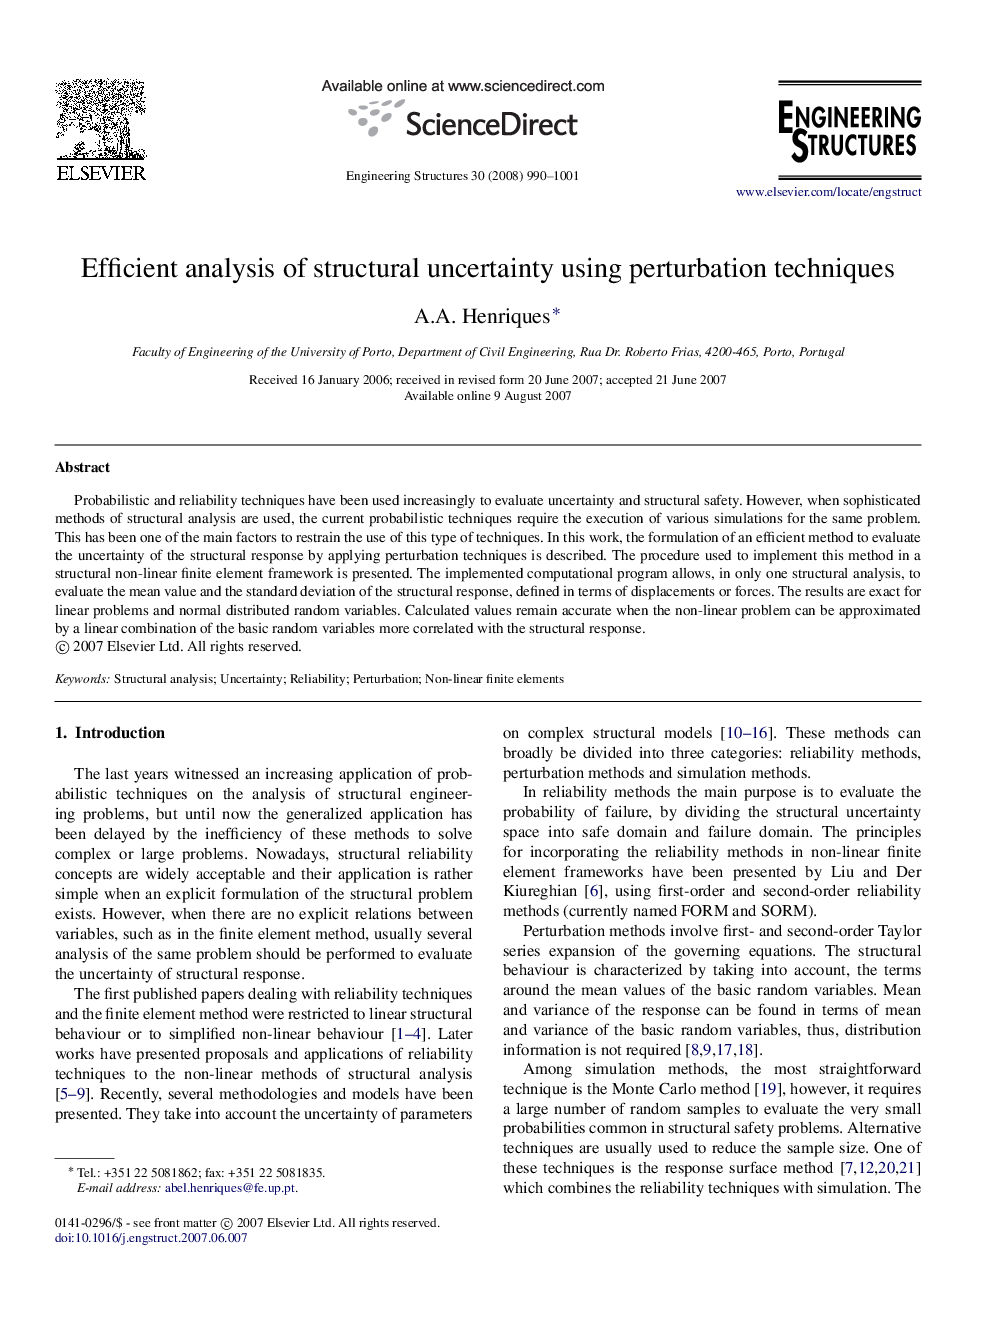 Efficient analysis of structural uncertainty using perturbation techniques